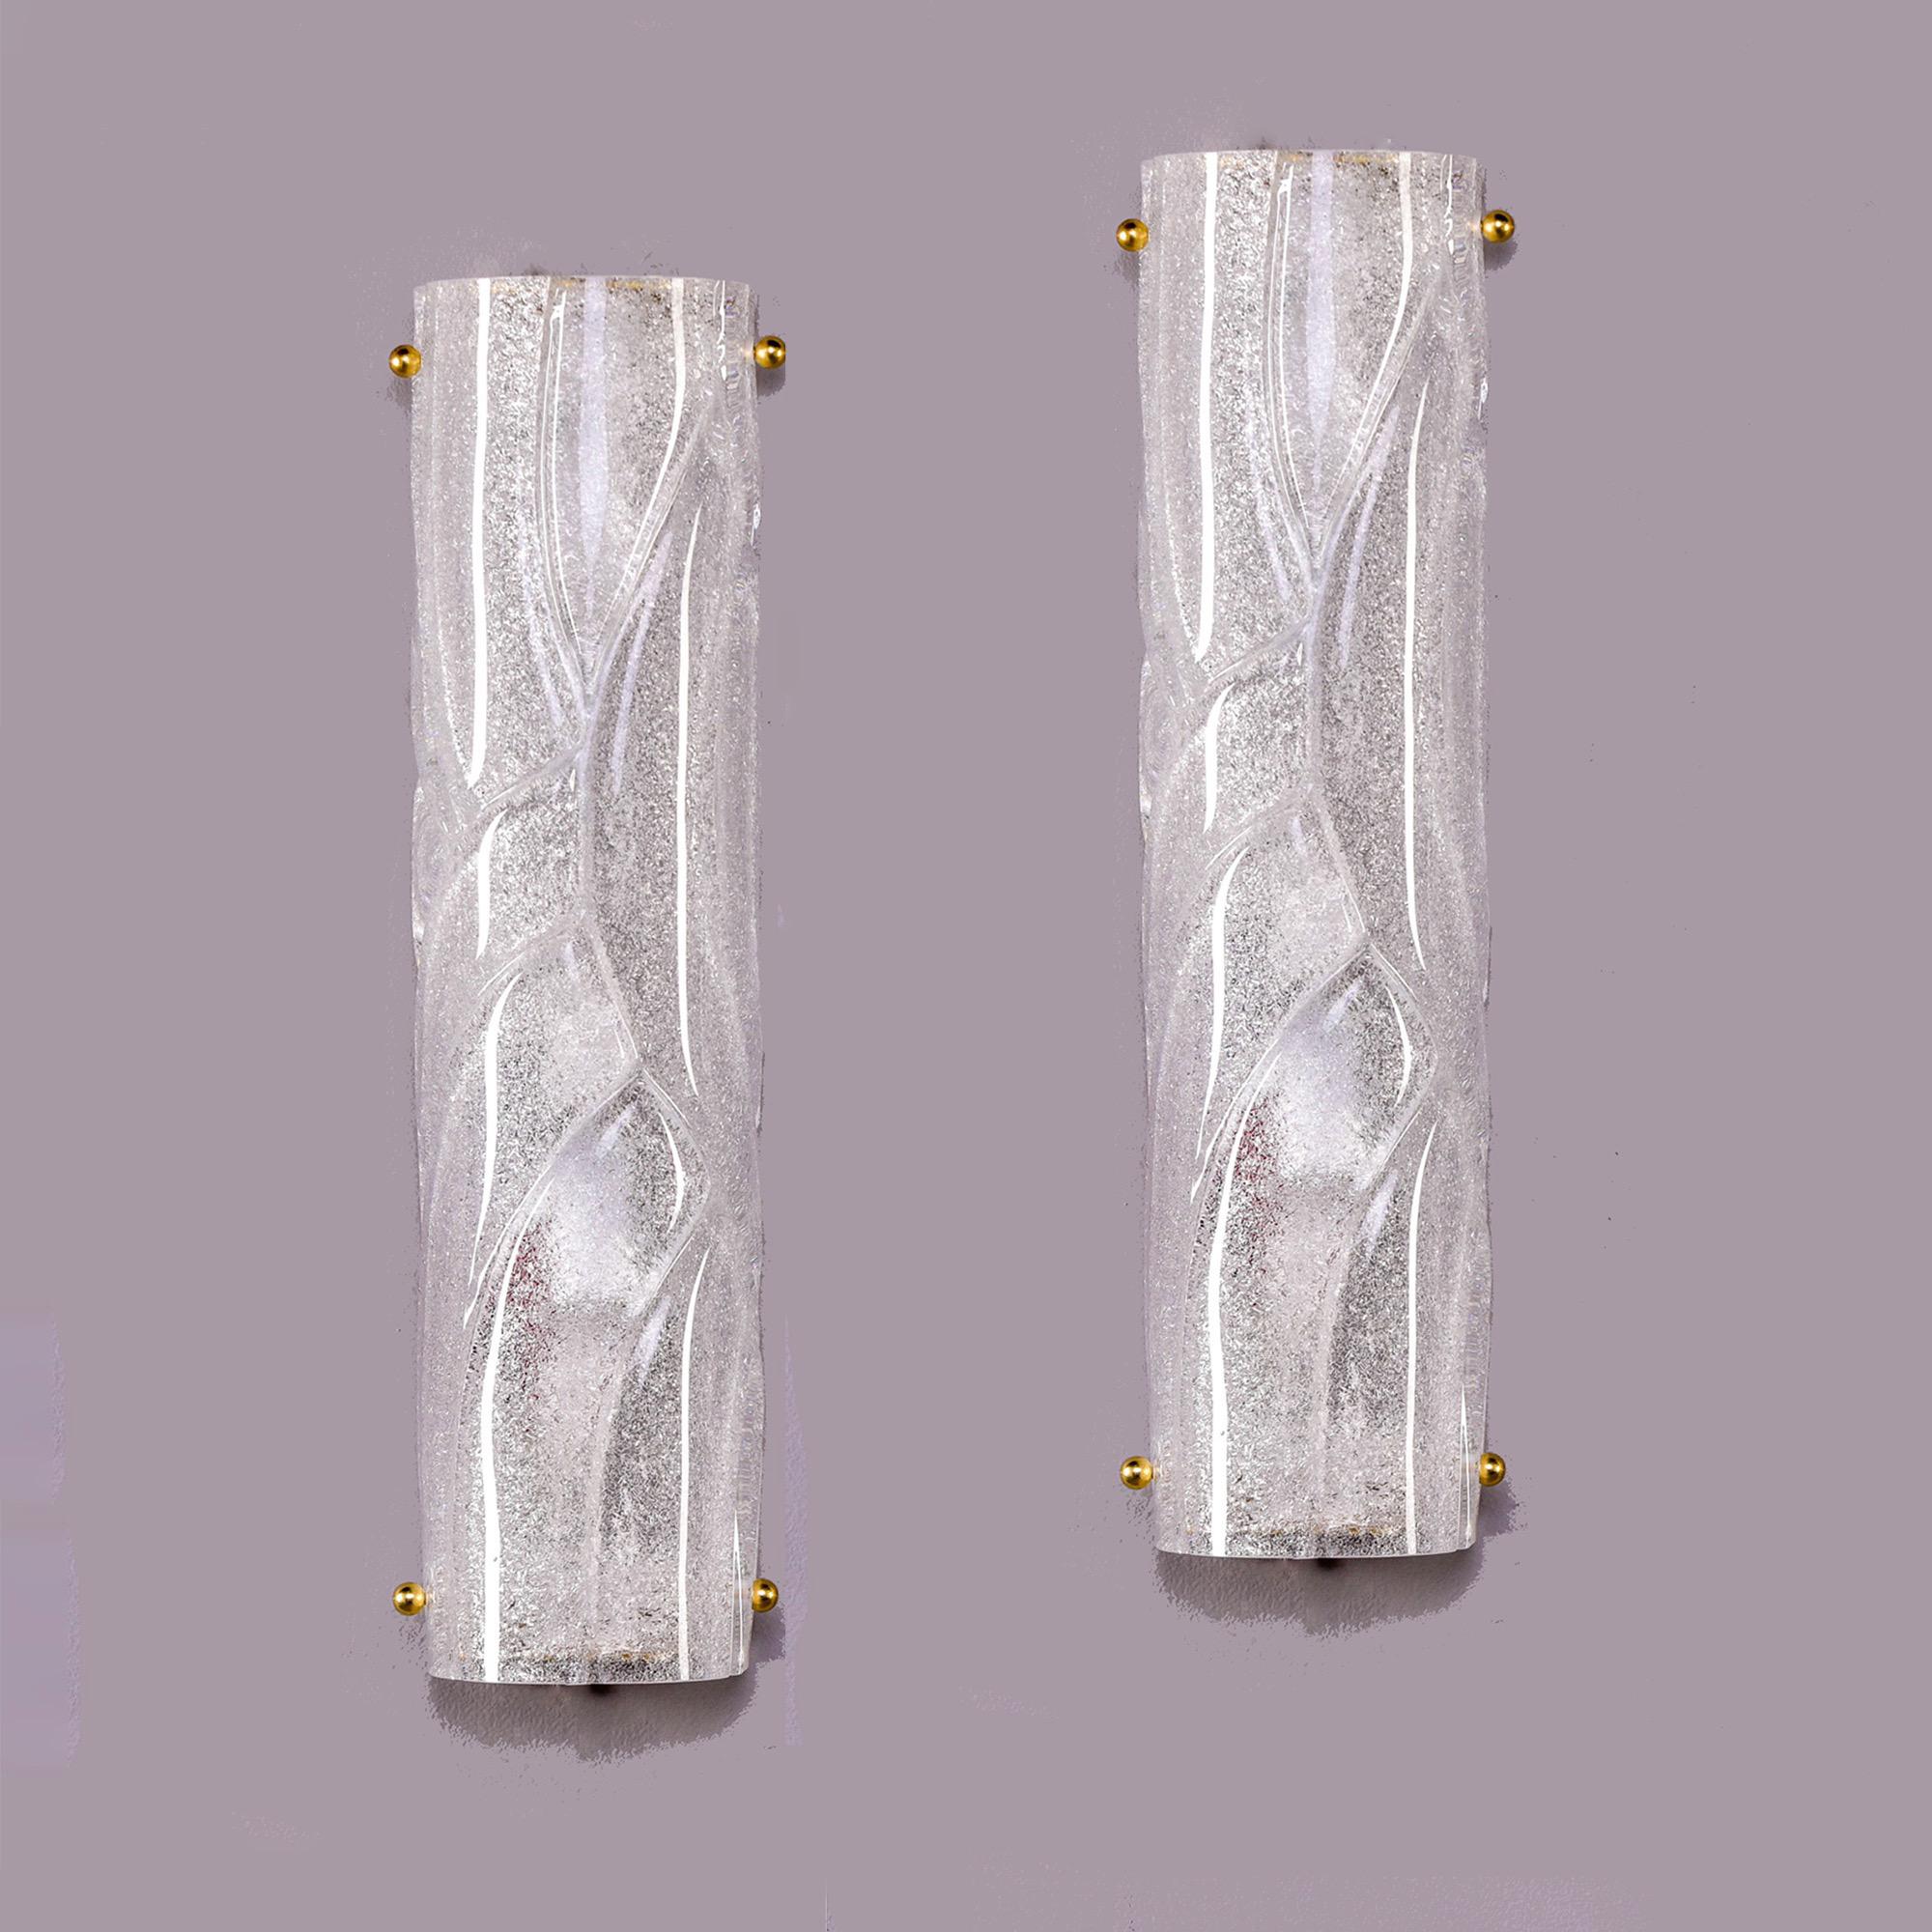 New pair of modern/transitional style Murano sconces in clear, heavy glass with surface swirls and texture. Each sconces has two candelabra sized sockets and brass hardware. Backplates that do not show when sconces are installed are included to